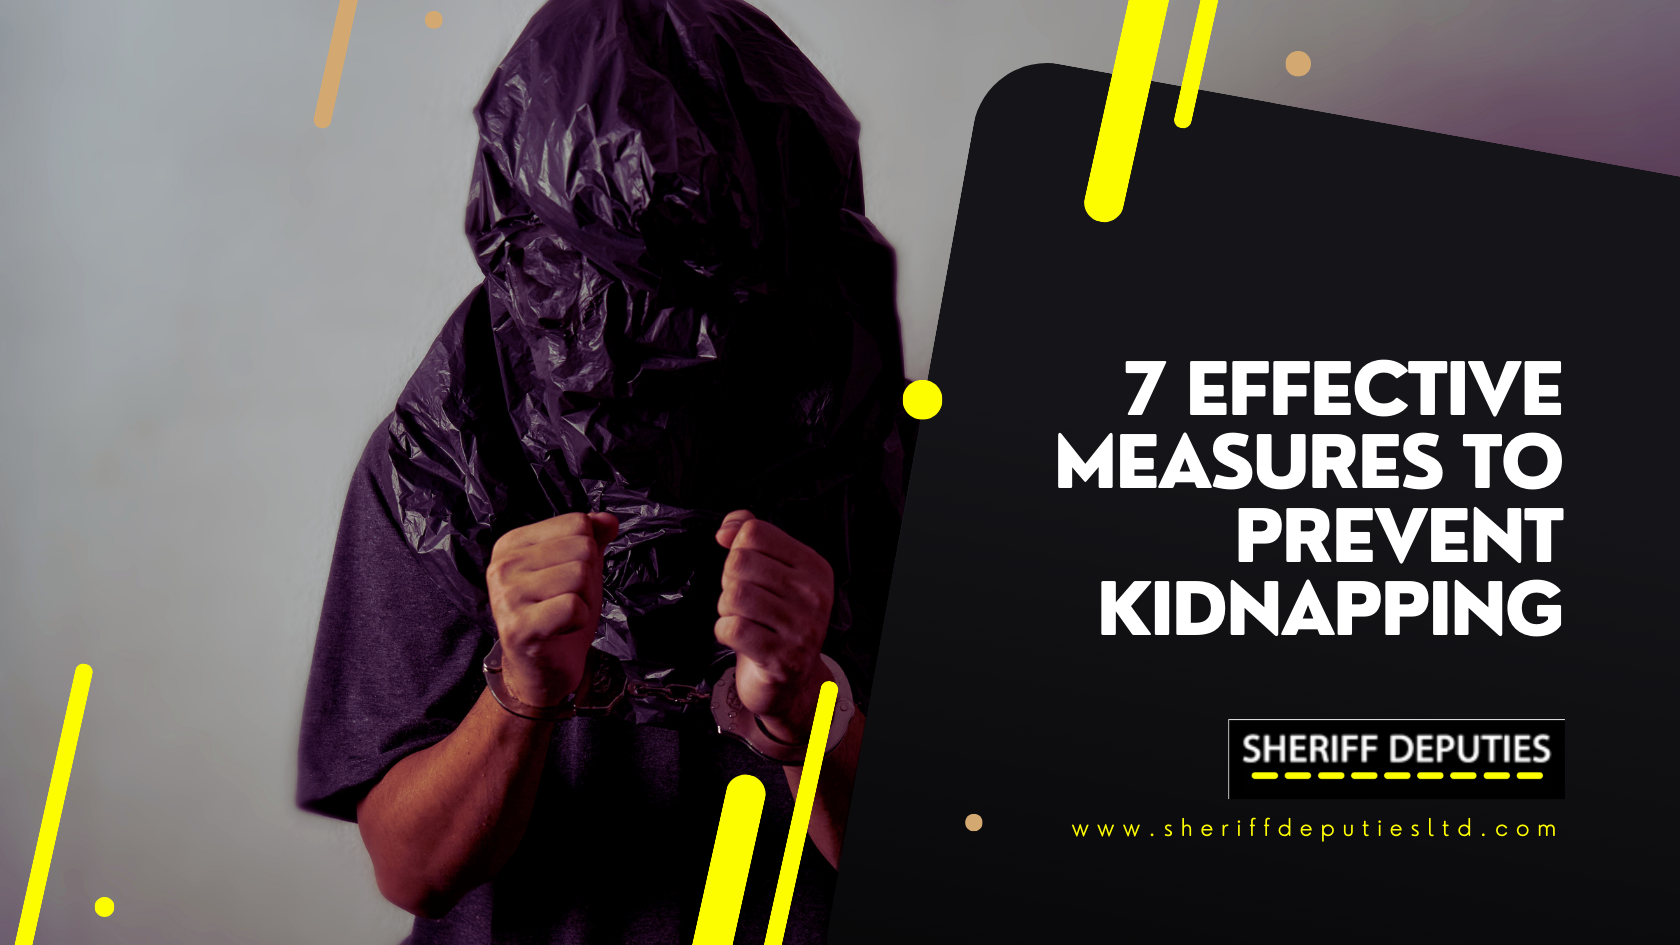 7 Effective Measures to Prevent Kidnapping